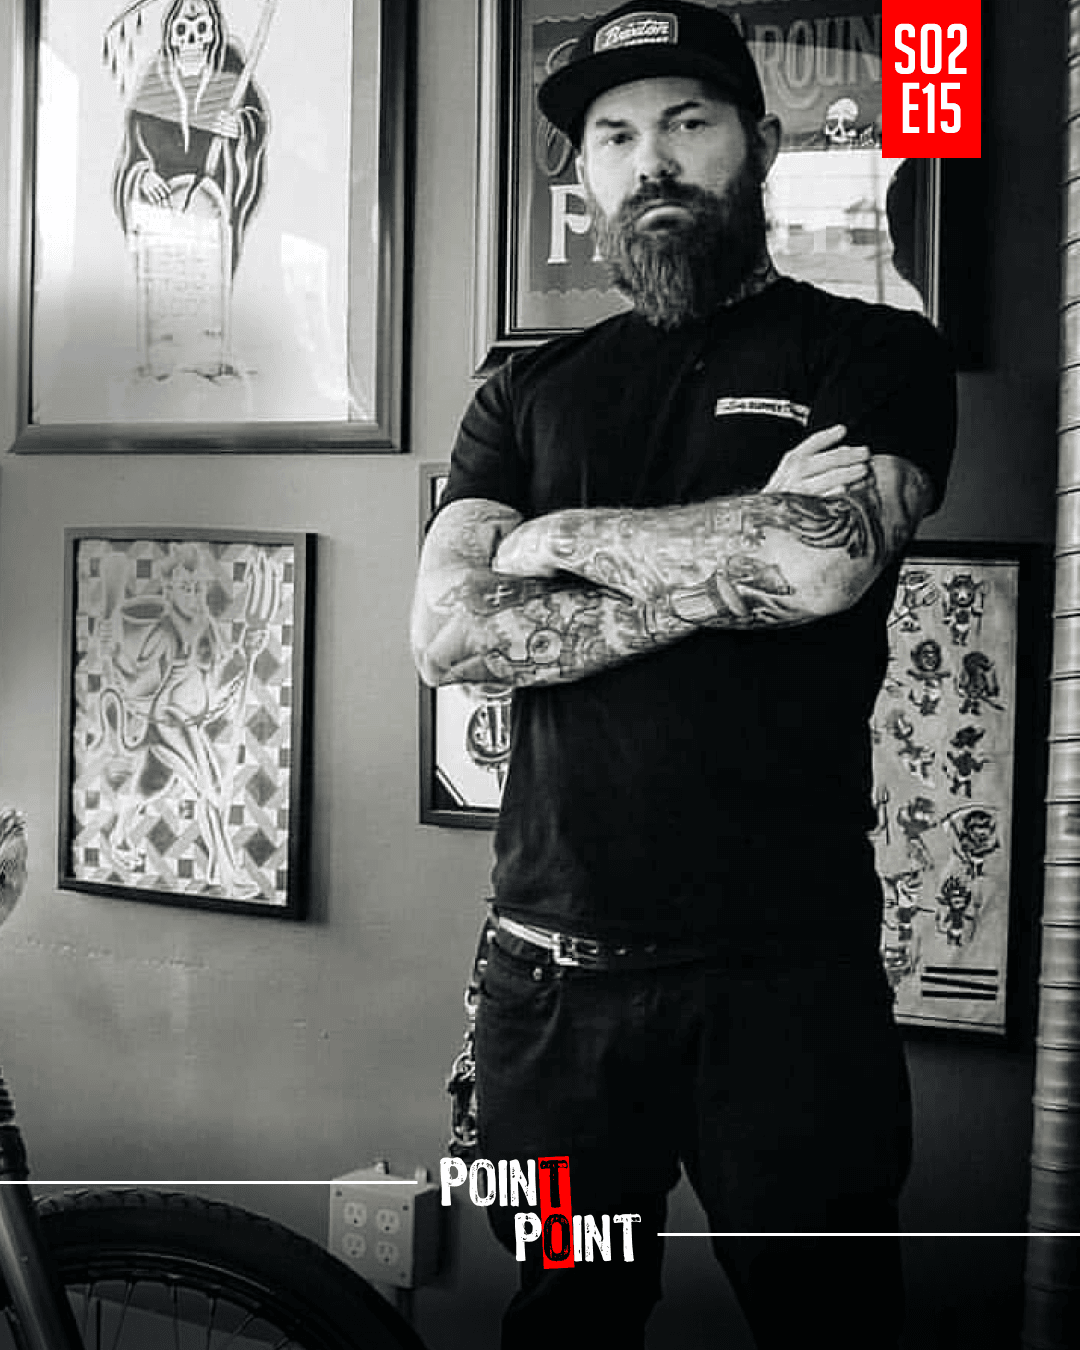 Bobby T Talks Bikes and Cars, Post-COVID Tattooing, and Getting Back To His Shop...